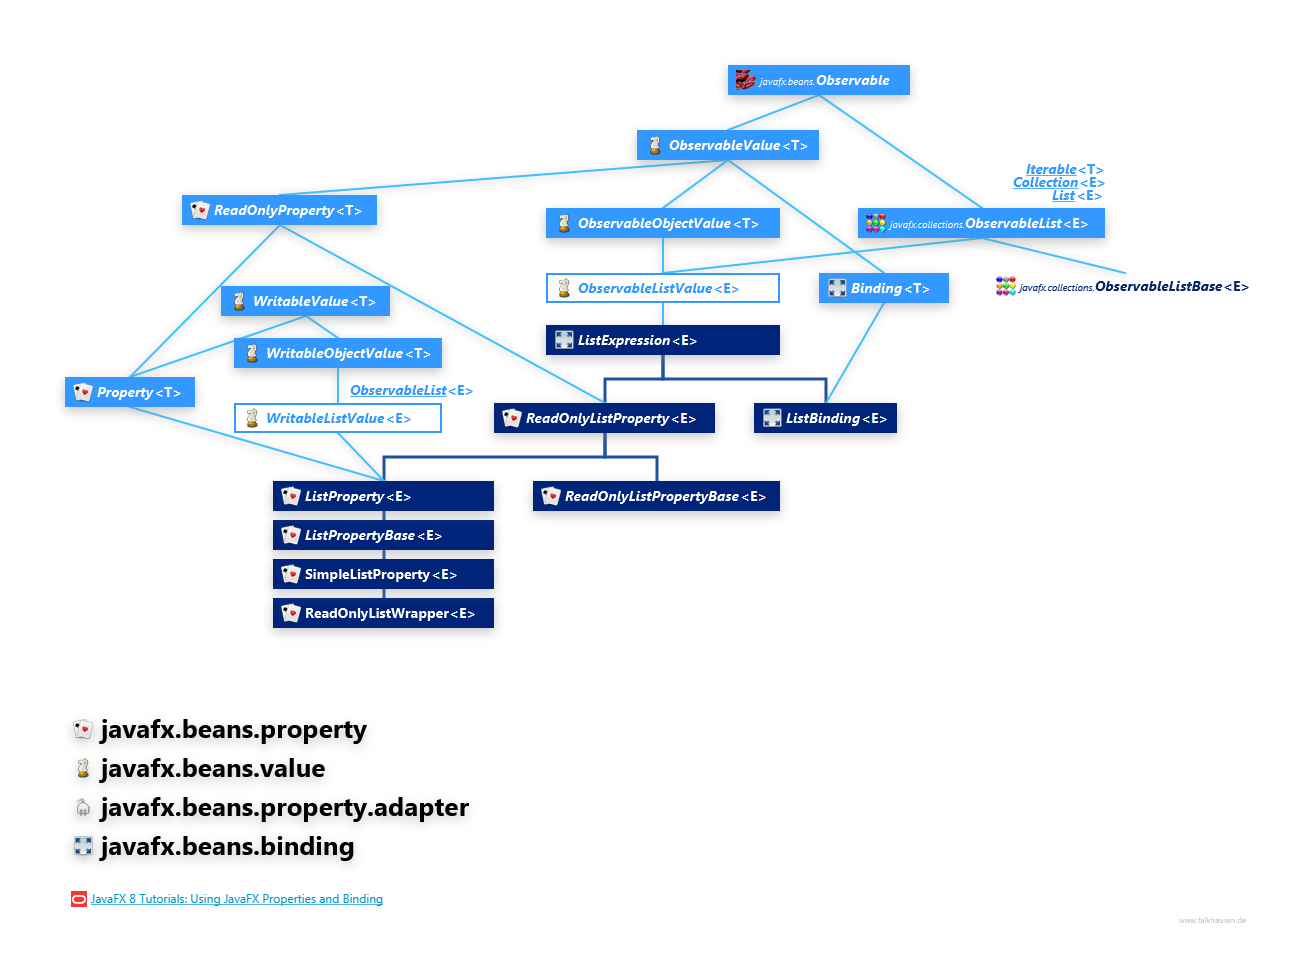 javafx.beans.property javafx.beans.value javafx.beans.property.adapter javafx.beans.binding ListProperty Hierarchy class diagram and api documentation for JavaFX 8